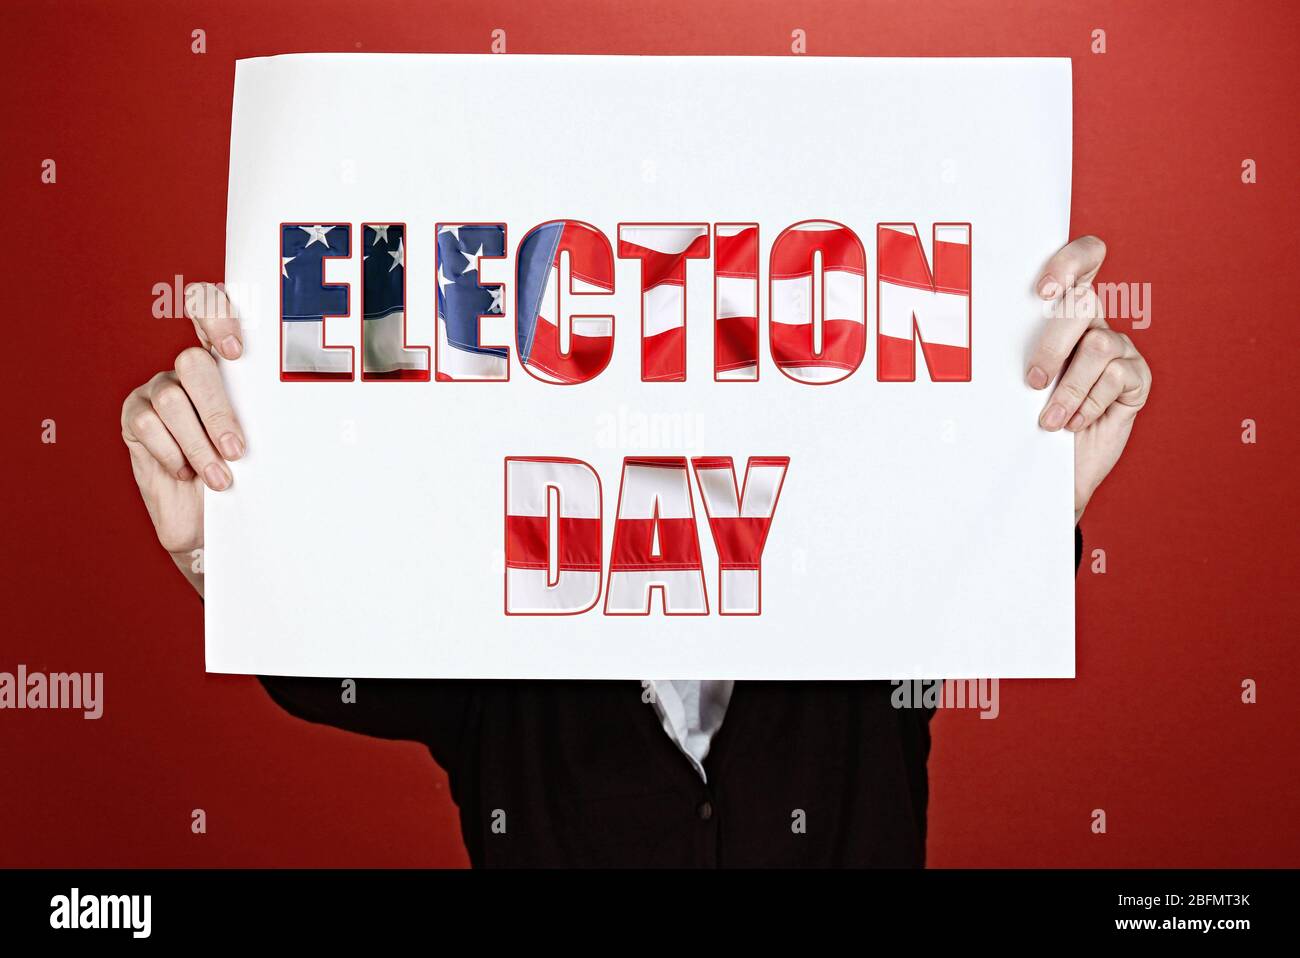 Woman holding paper with Election Day text on red background Stock Photo